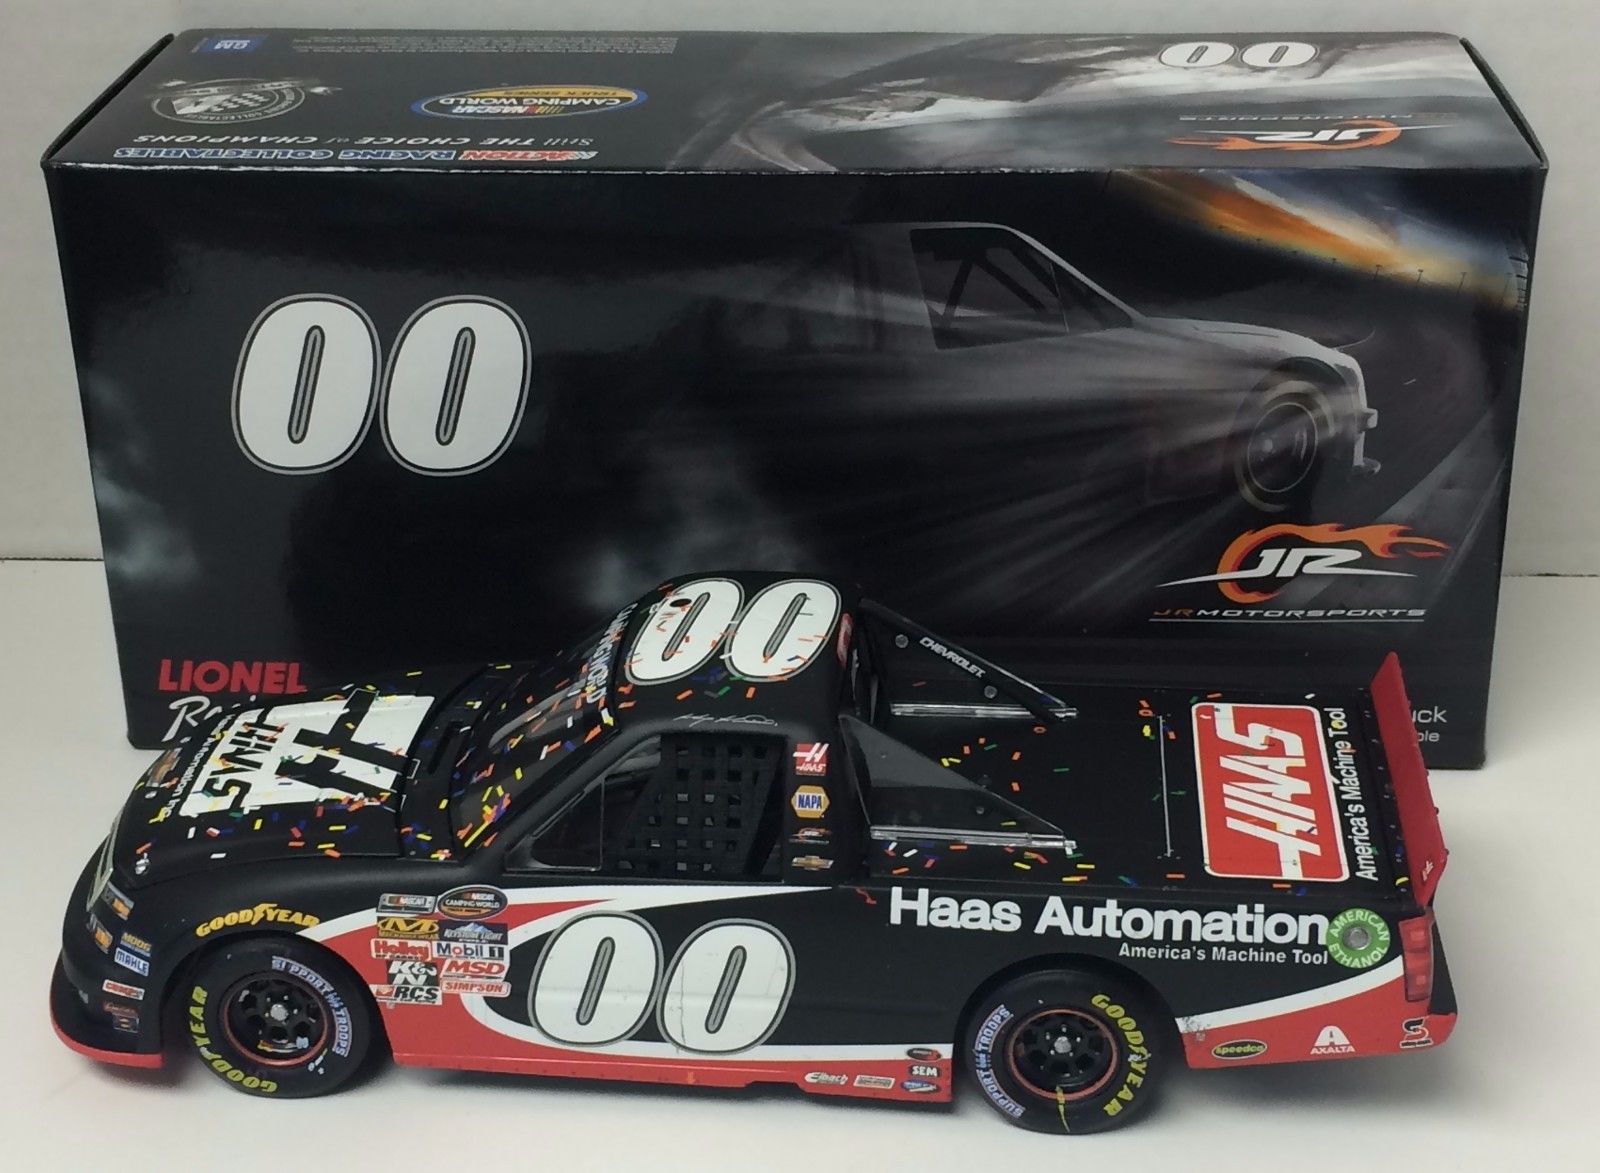 2015 Kasey Kahne 1/24th Haas Automation "Camping World Truck Series" Win Truck